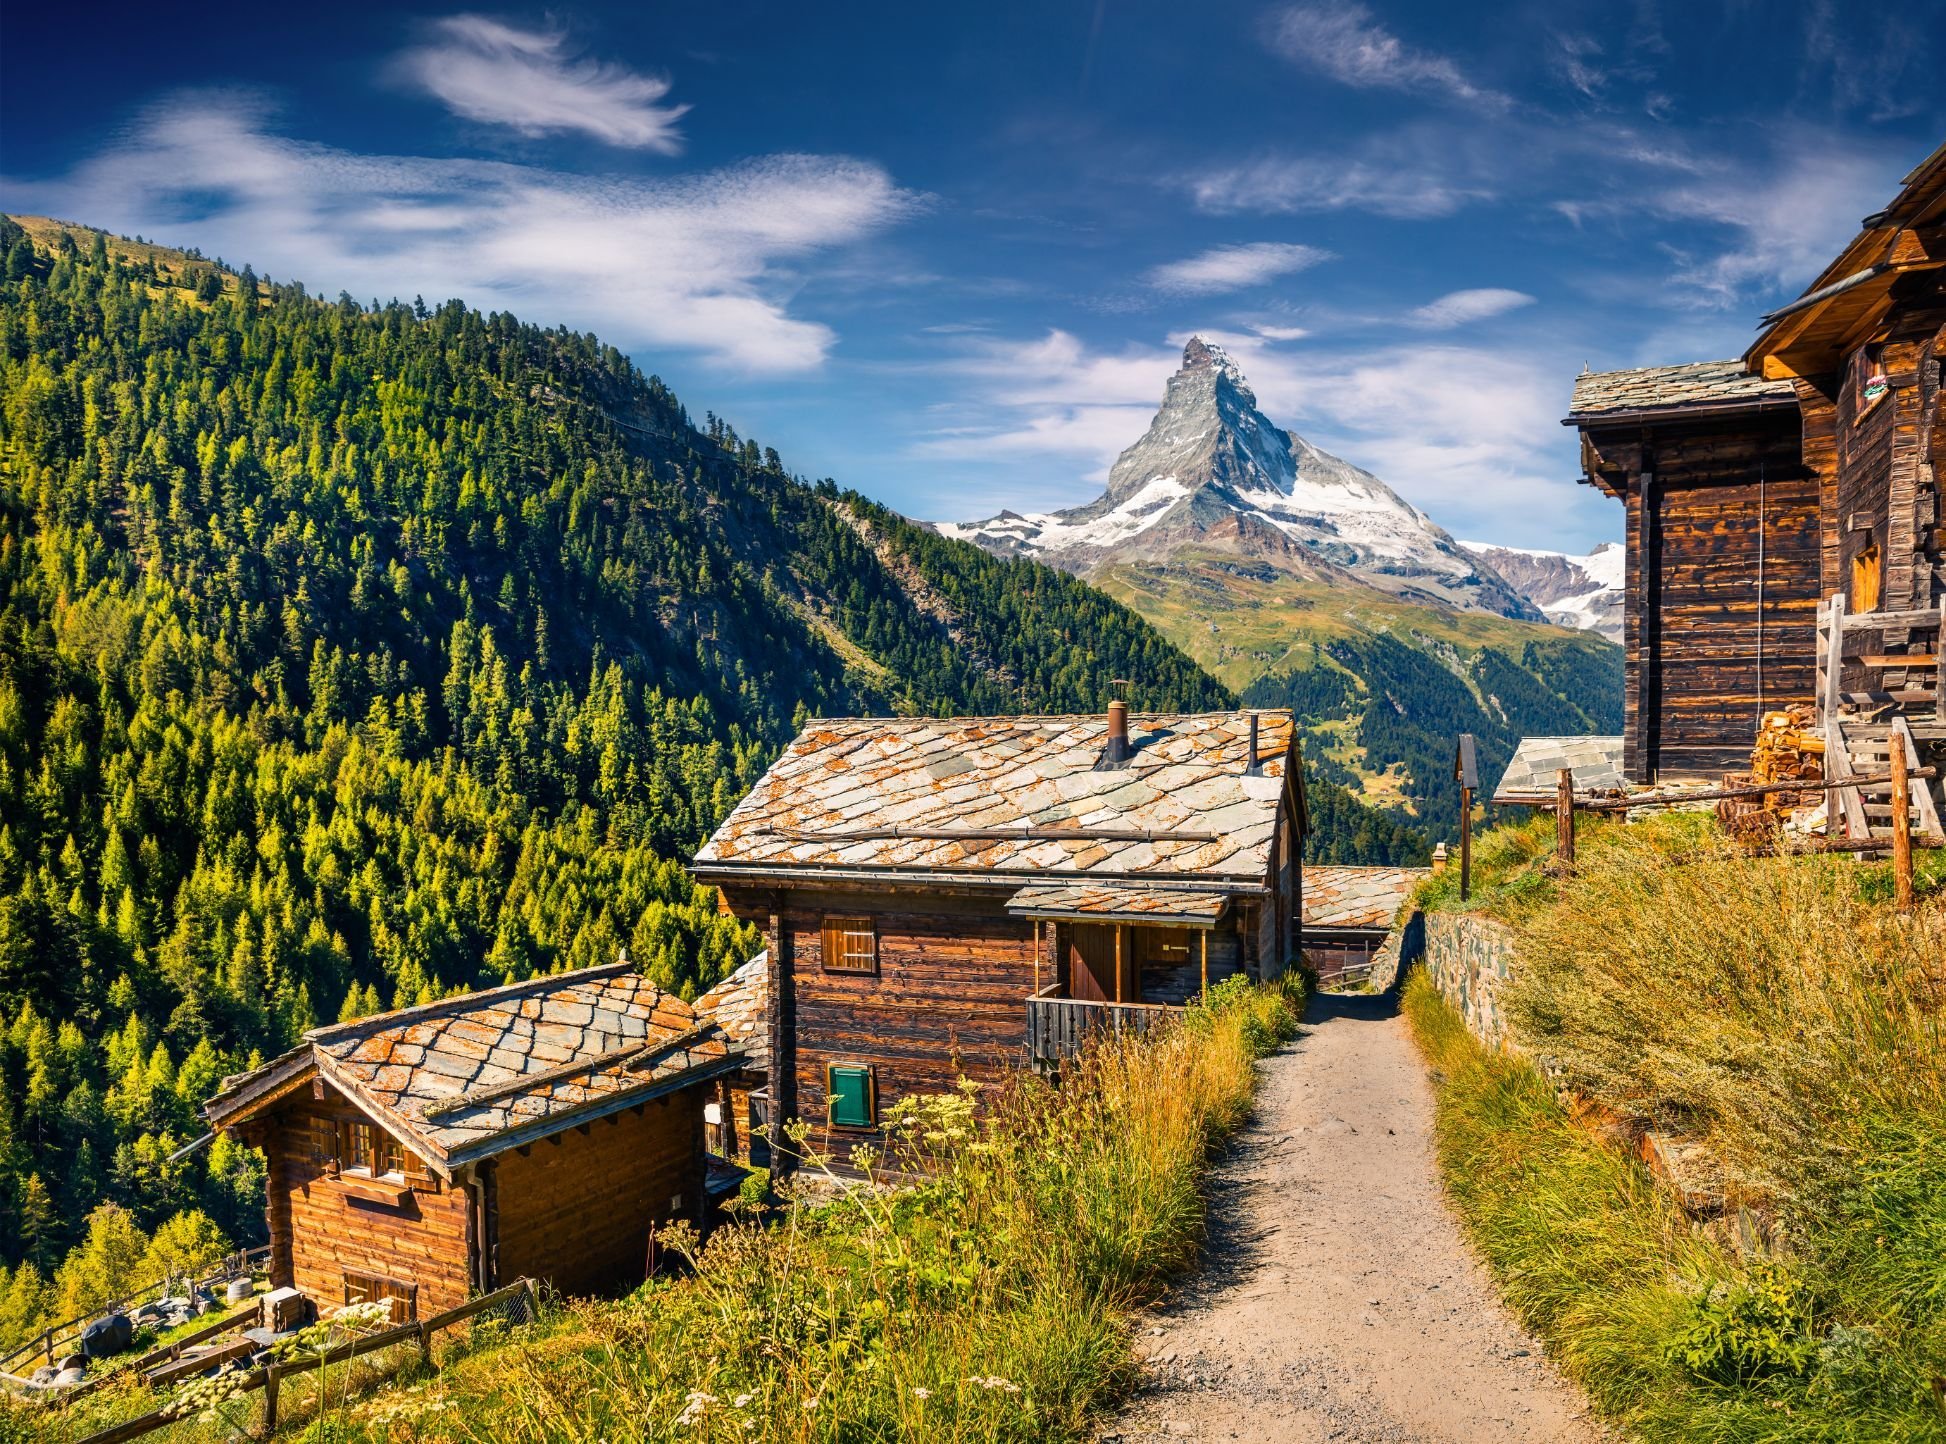 The scenic town of Zermatt is the gateway to the Tour of the Matterhorn. Photo: Getty